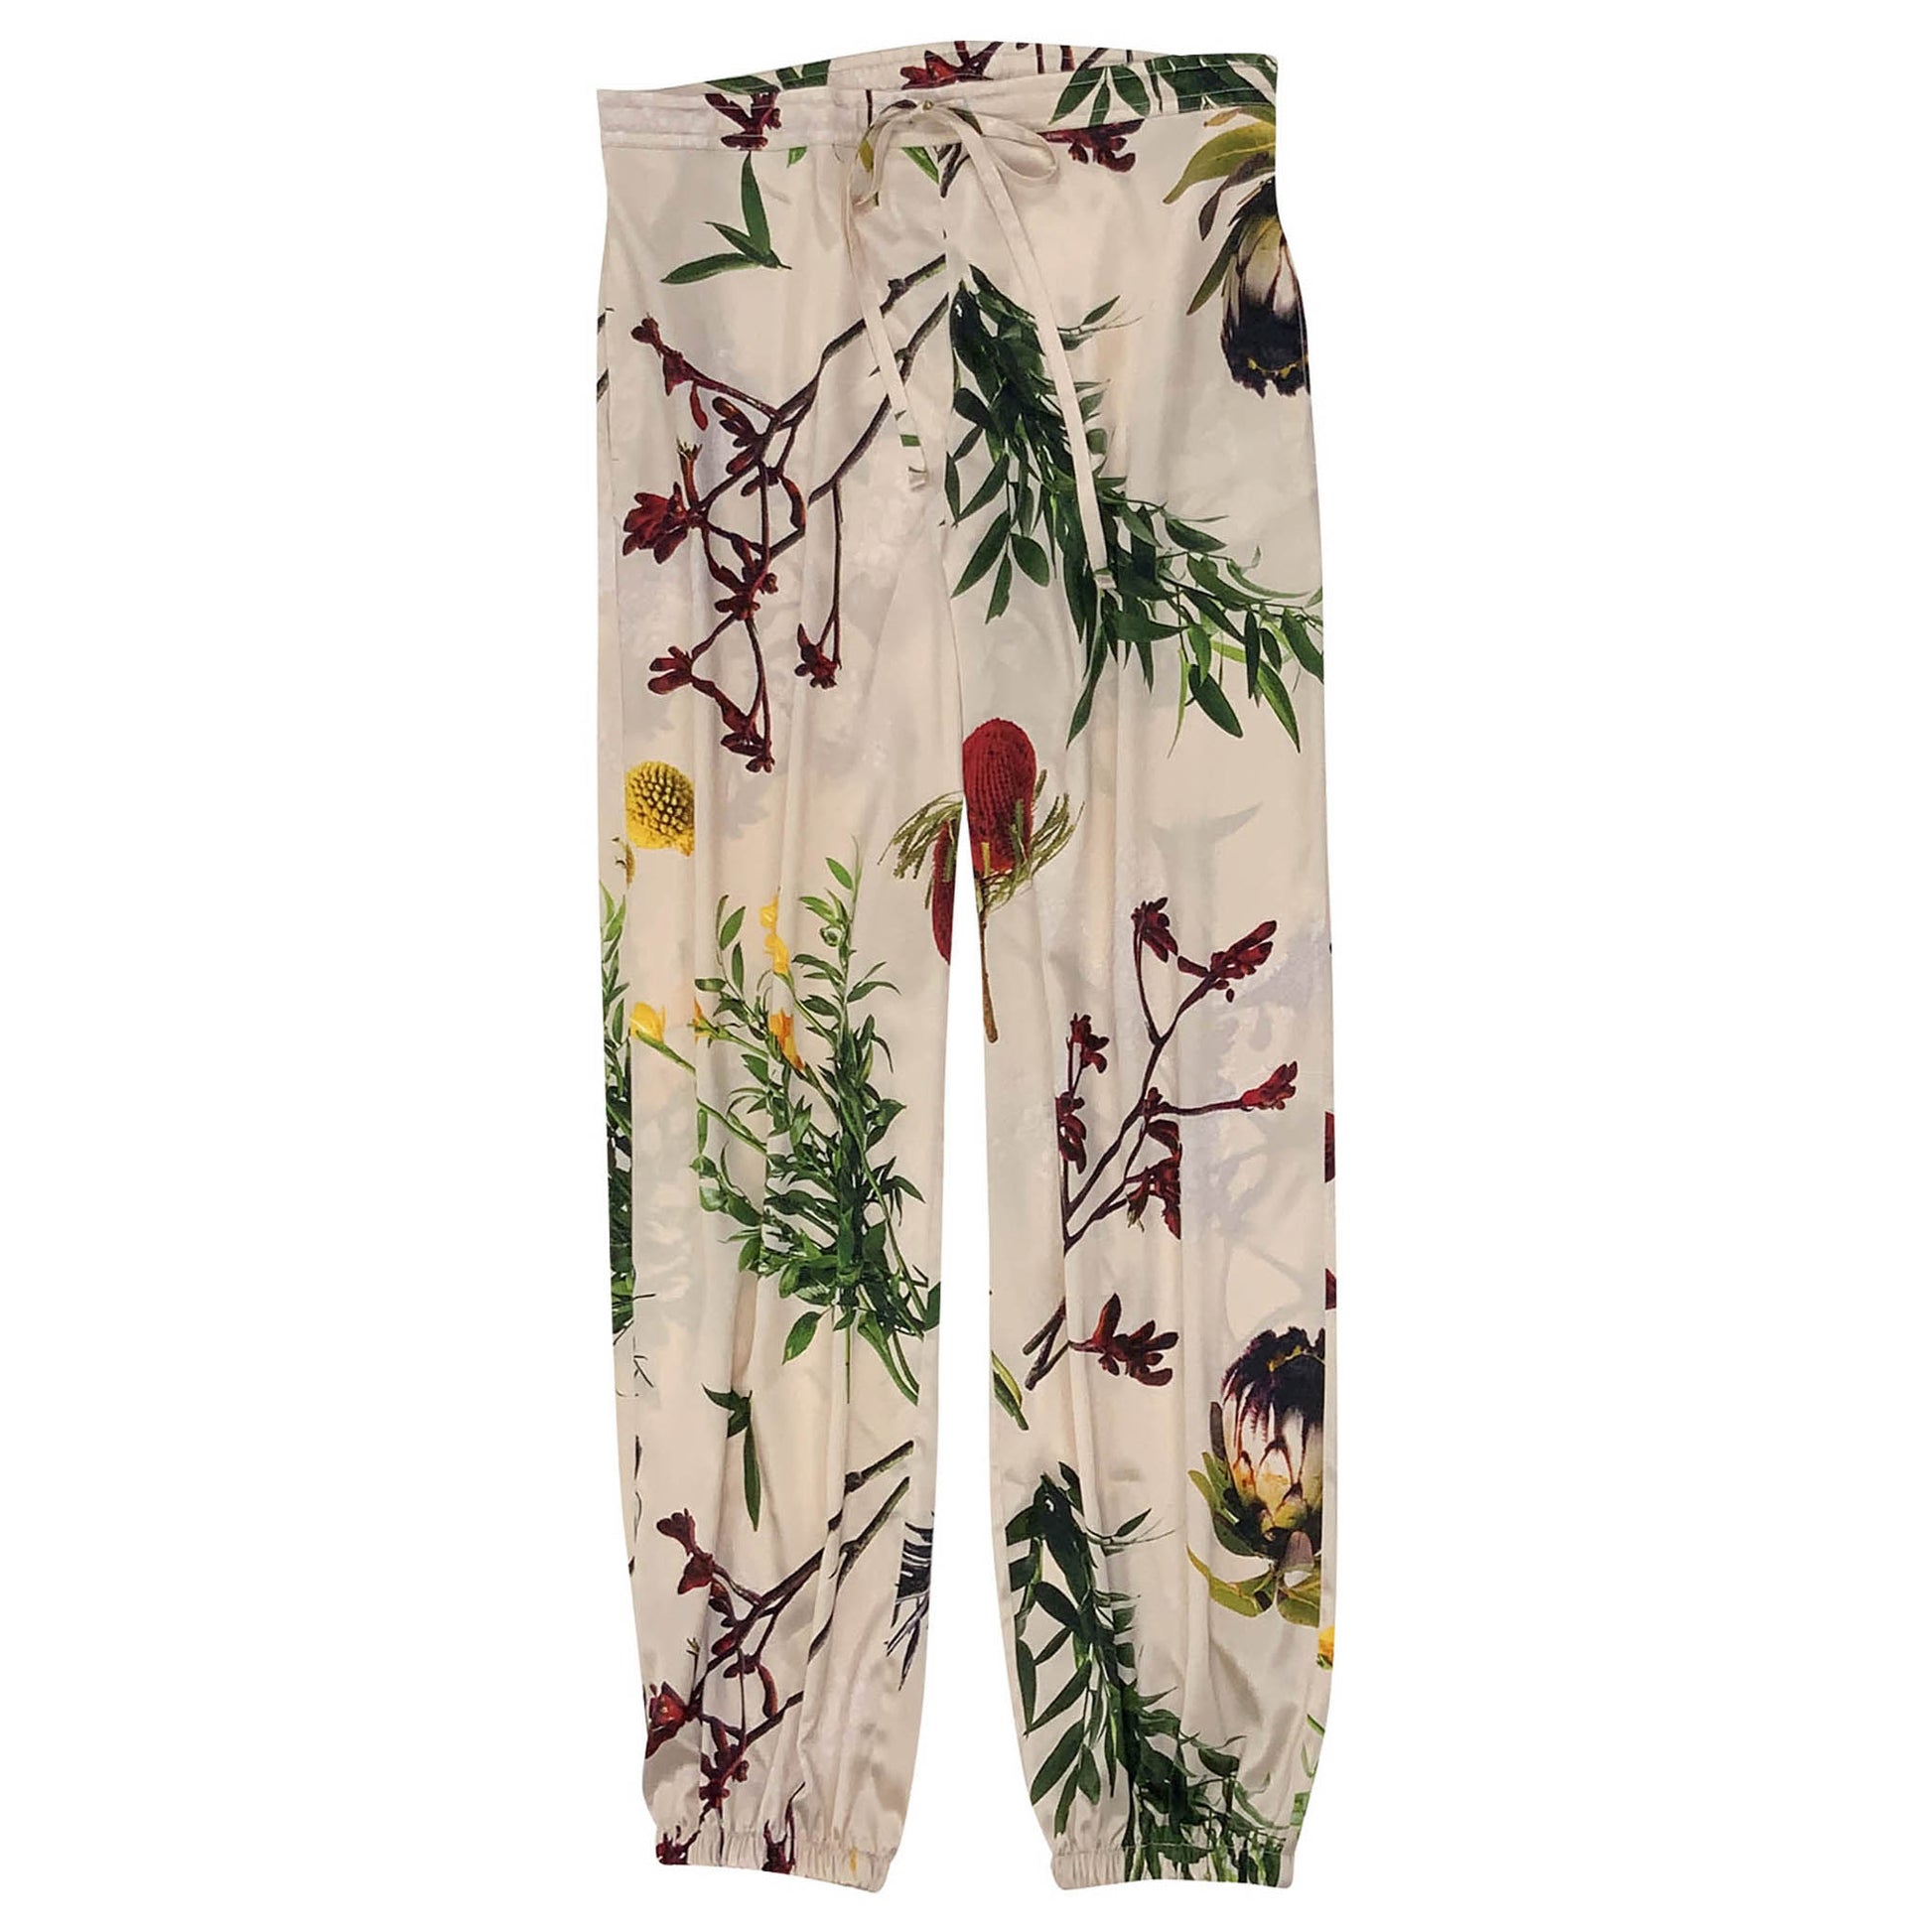 The Flying Flower pants from NOKAYA are crafted from Mulberry silk.